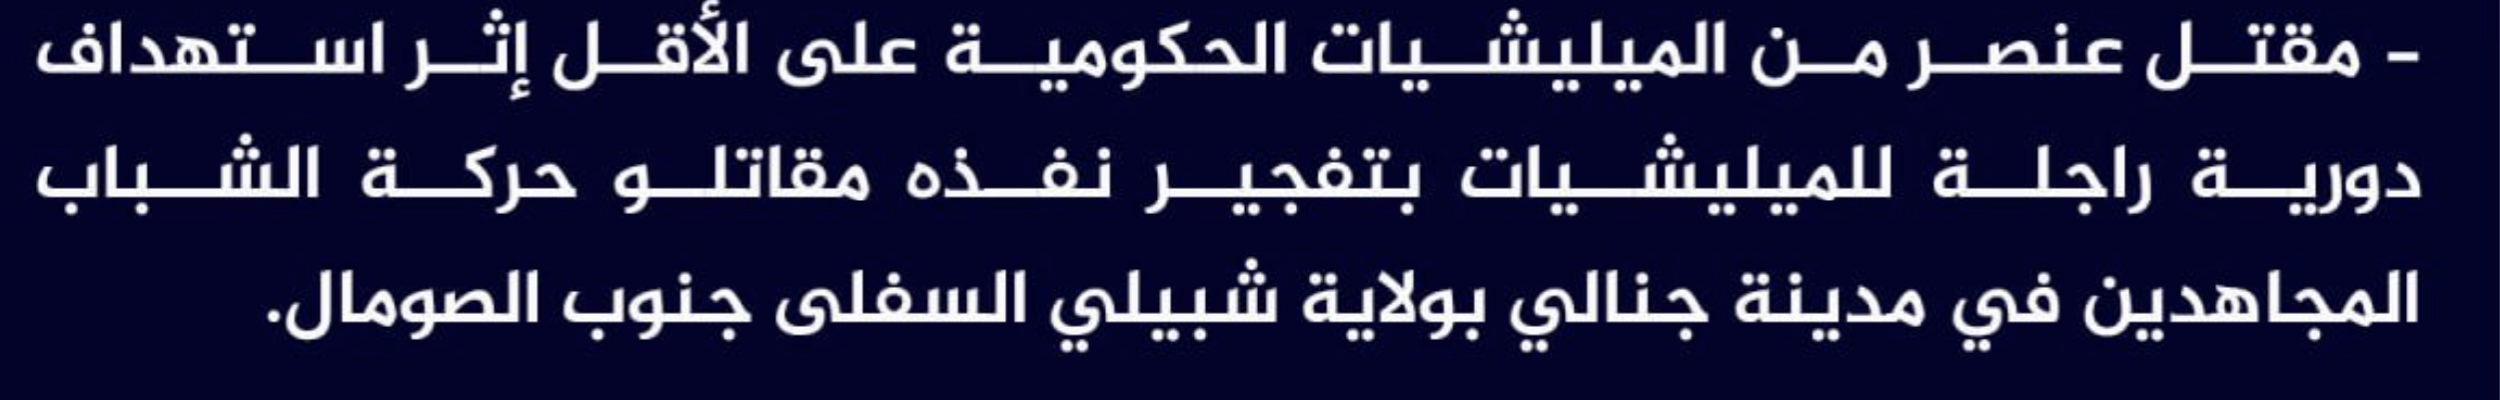 (Claim) al-Shabaab Killed at Least a Somalian Forces Element in an IED Attack on a Foot Patrol in Janali City, Lower Shabelle State, Southern Somalia - 22 March 2023